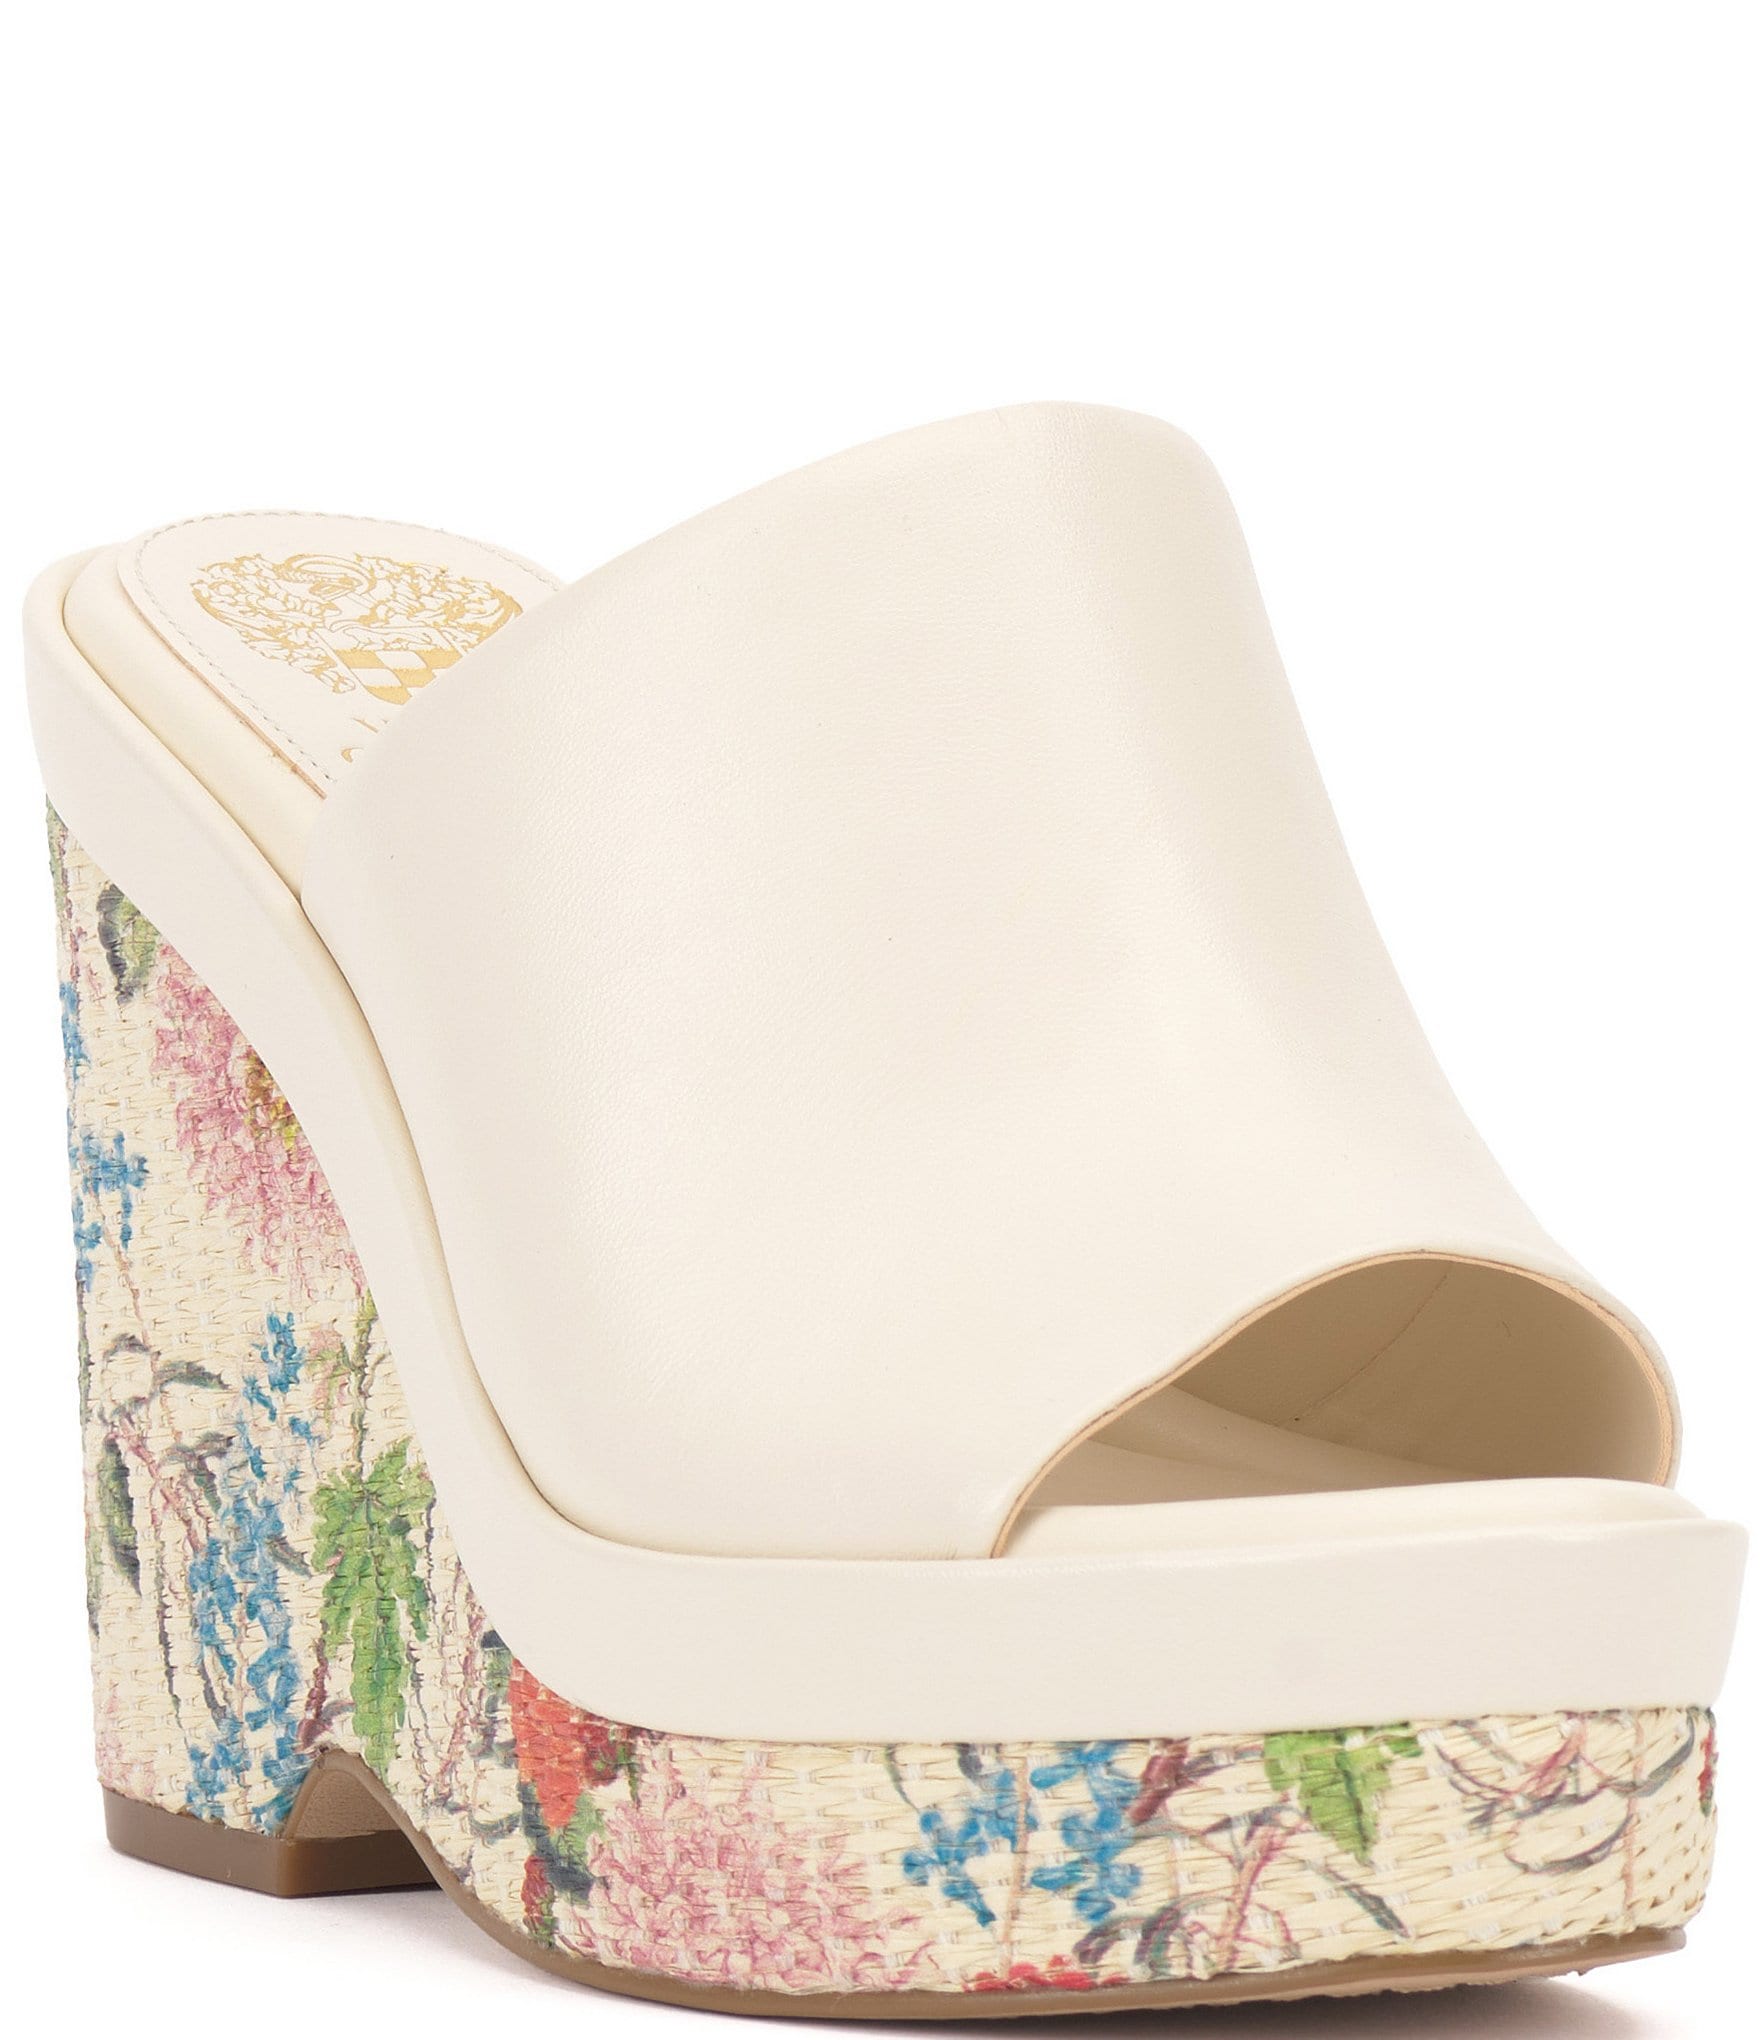 Vince Camuto Danvy Leather Wedge Sandals | Dillard's